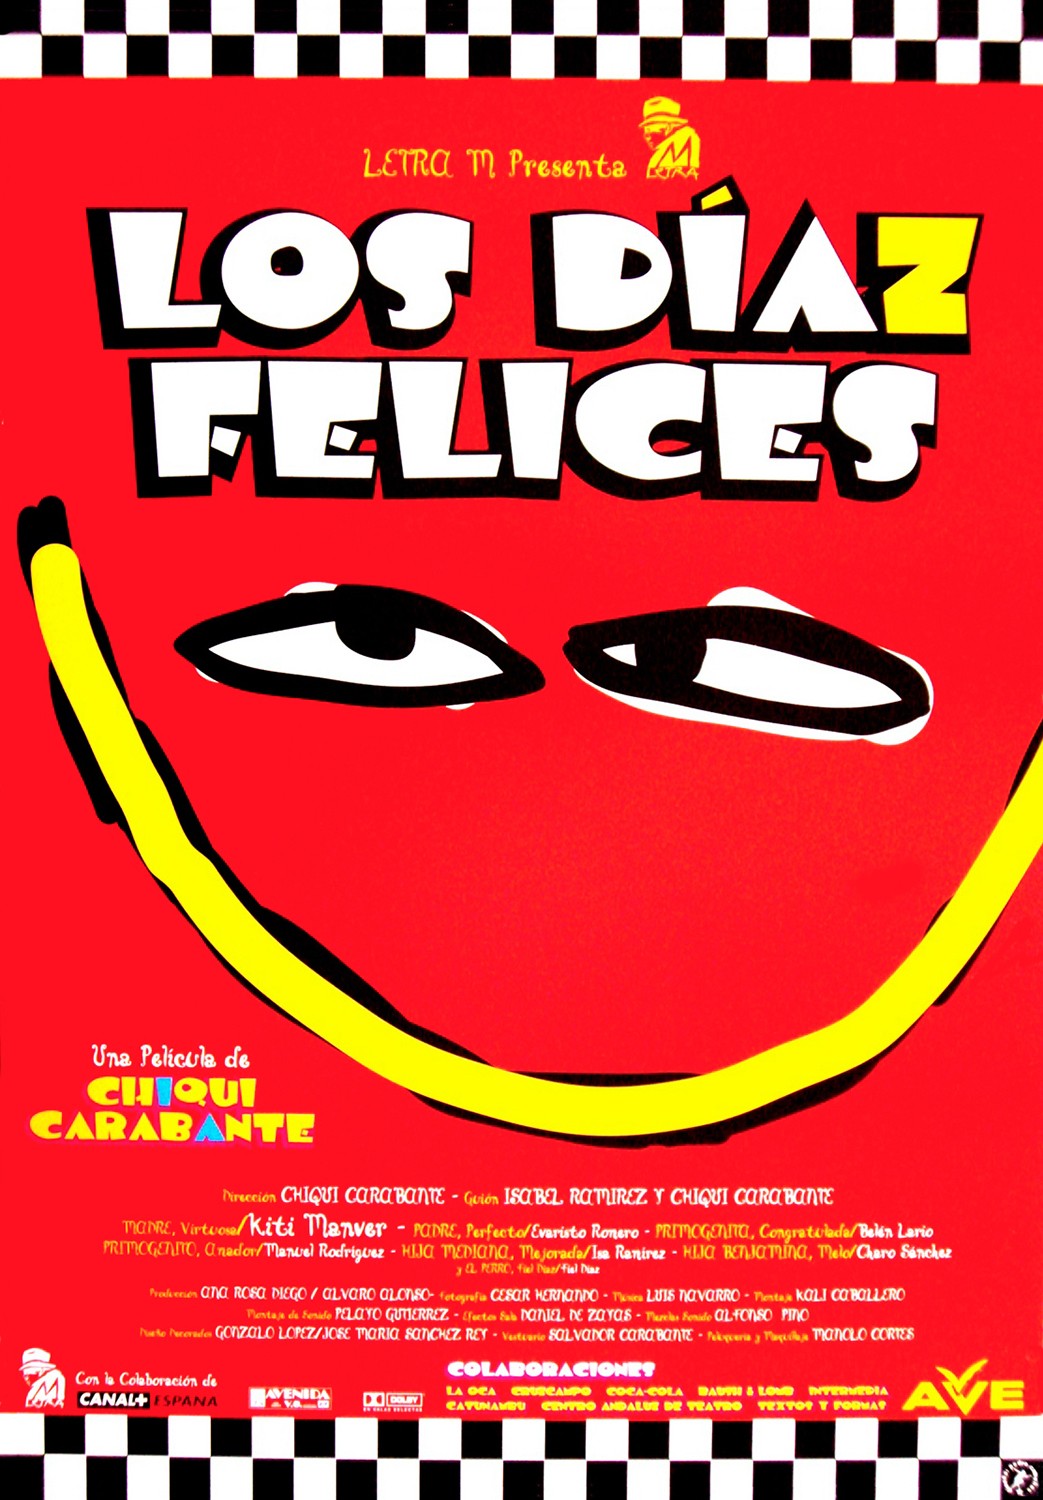 Extra Large Movie Poster Image for Los Daz felices